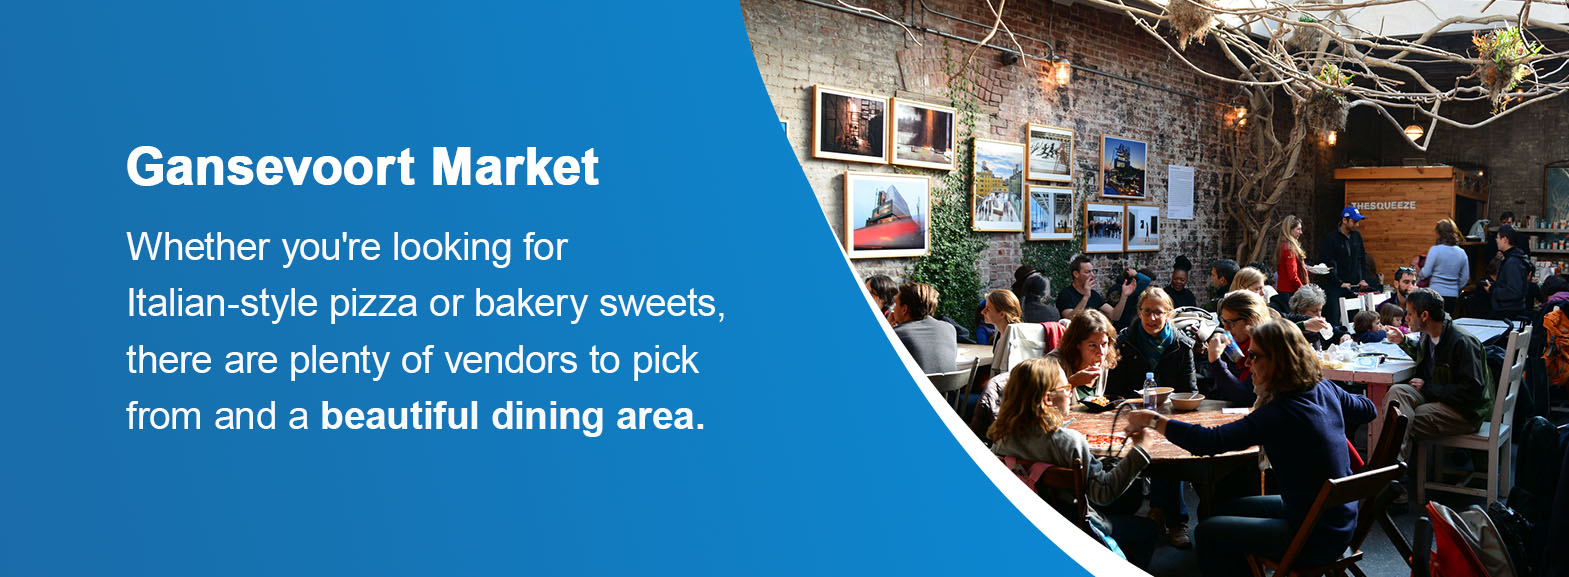 Gansevoort Market: New York, New York. Whether you're looking for Italian-style pizza or bakery sweets, there are plenty of vendors to pick from and a beautiful dining area.